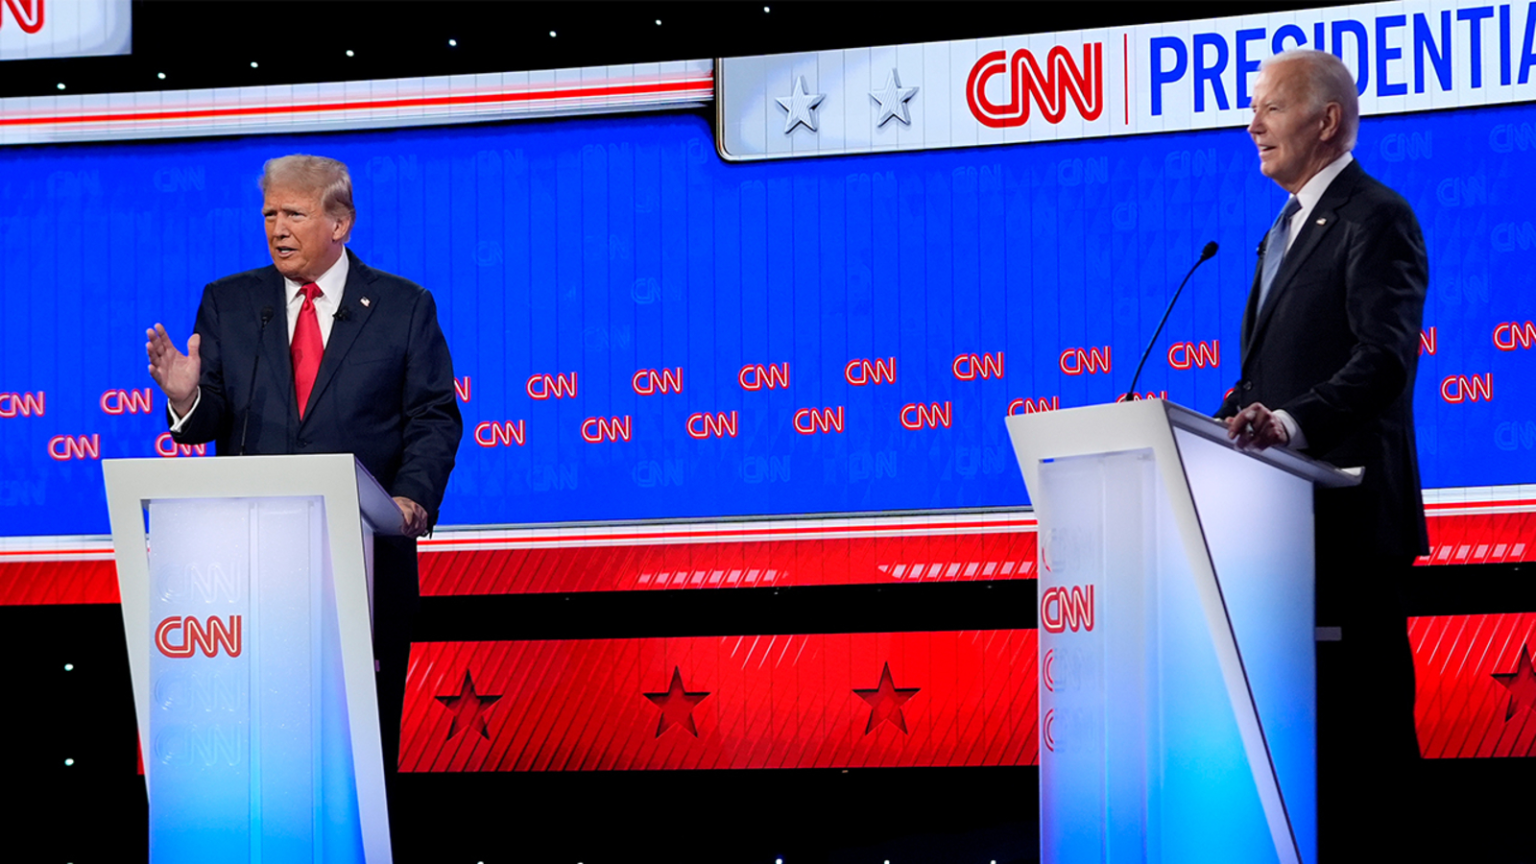 joe-biden-donald-trump-both-took-credit-for-the-strong-economy-during-the-debate